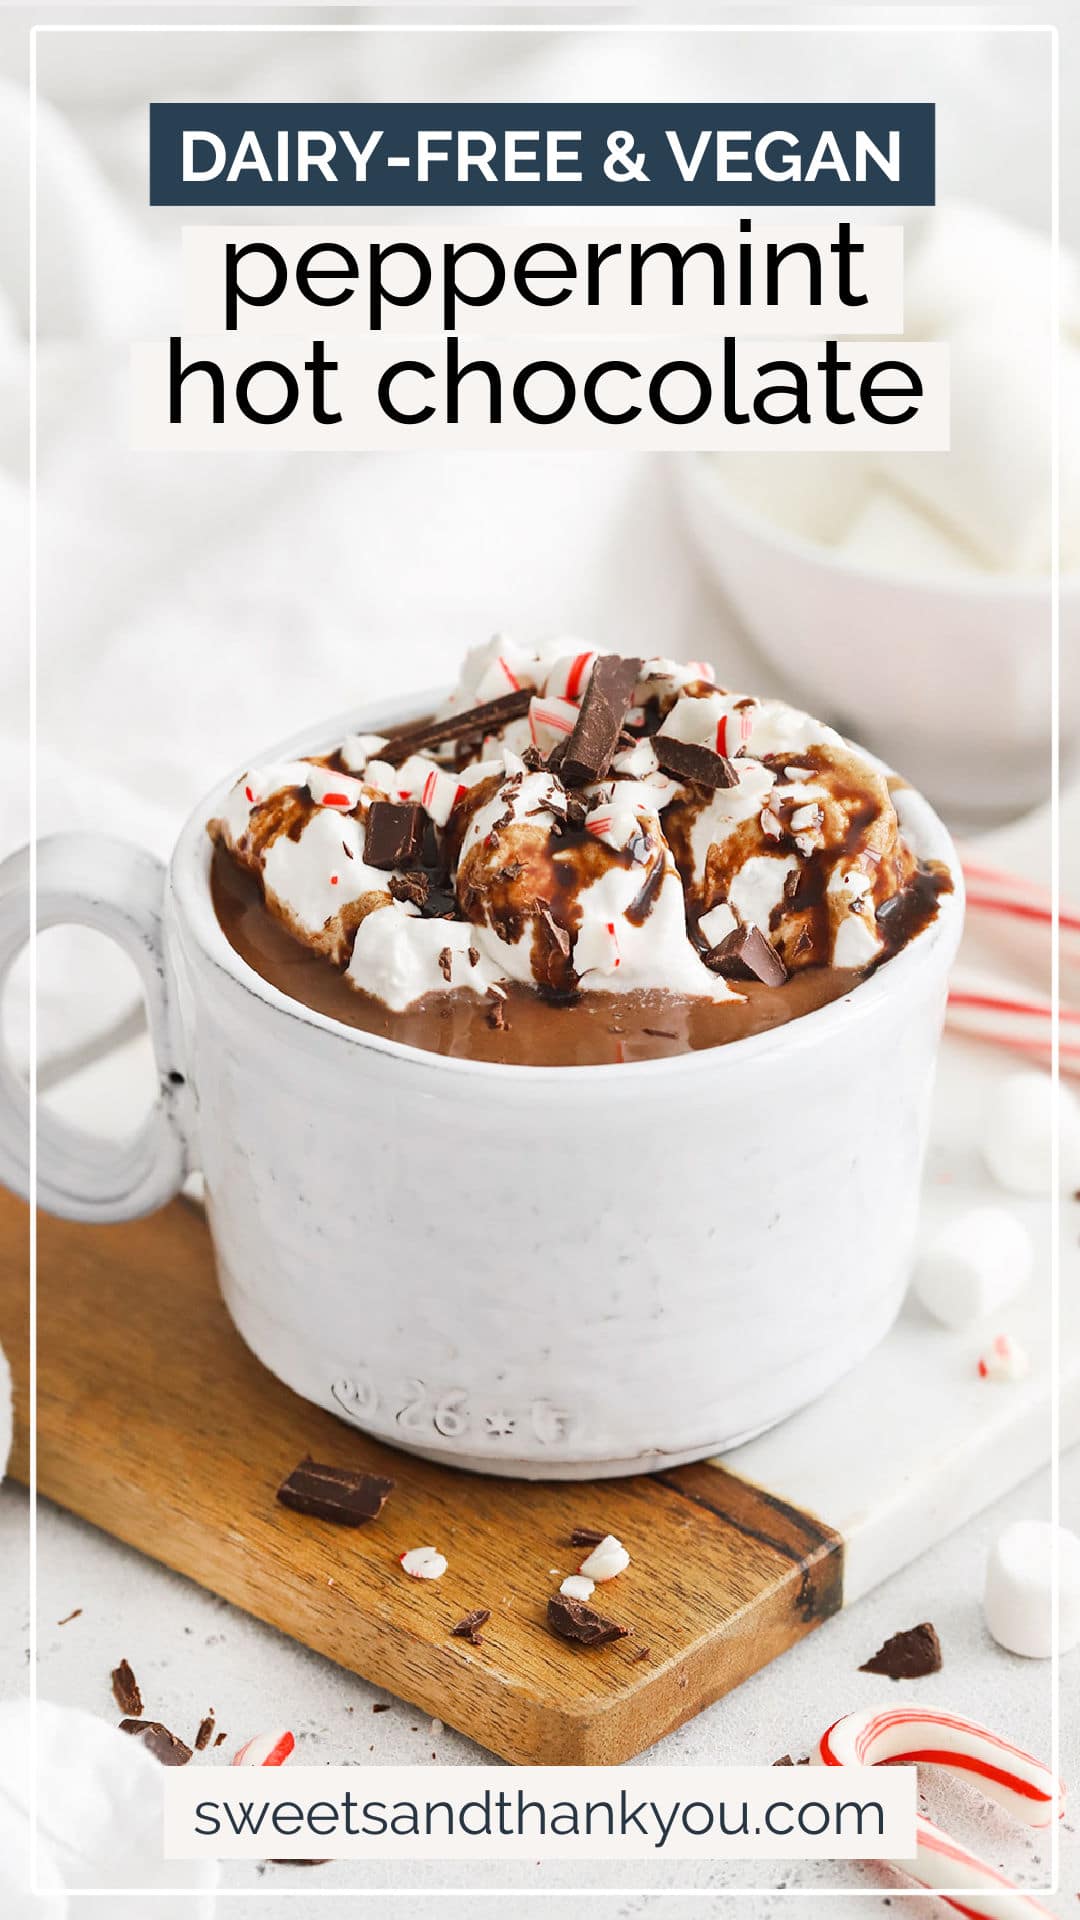 Vegan Peppermint Hot Chocolate - This dairy-free peppermint hot chocolate recipe is so warm and cozy! You'll love the creamy texture and warm peppermint flavor! / vegan hot chocolate recipe / vegan hot cocoa recipe / vegan peppermint hot cocoa / dairy free peppermint hot cocoa / healthy hot cocoa recipe / dairy free hot cocoa recipe / peppermint hot cocoa recipe / homemade peppermint hot chocolate / homemade peppermint hot cocoa